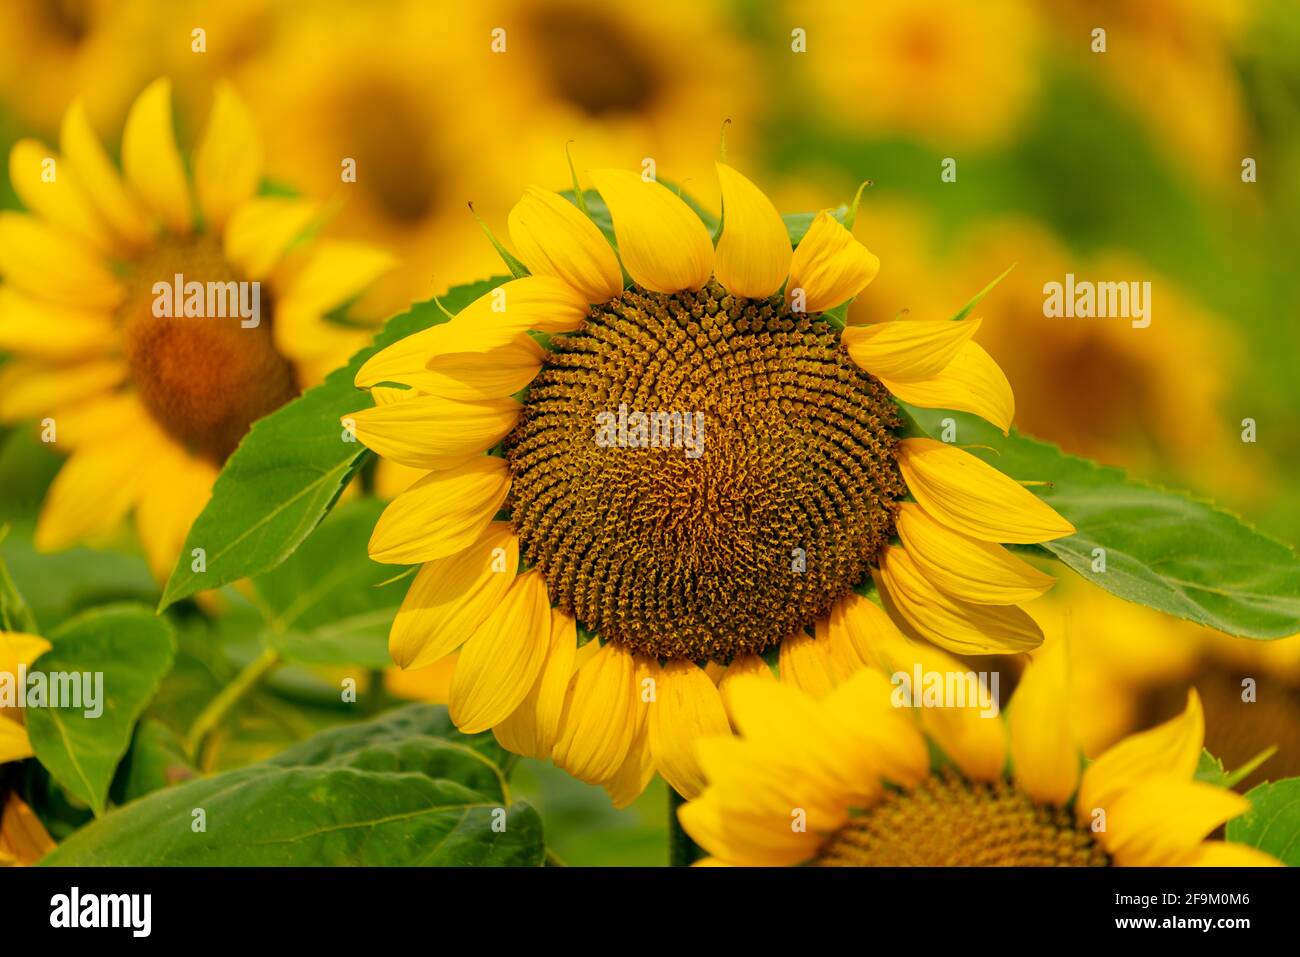 Sunflowers blooming in the field. harvest and agriculture in summer season Stock Photo